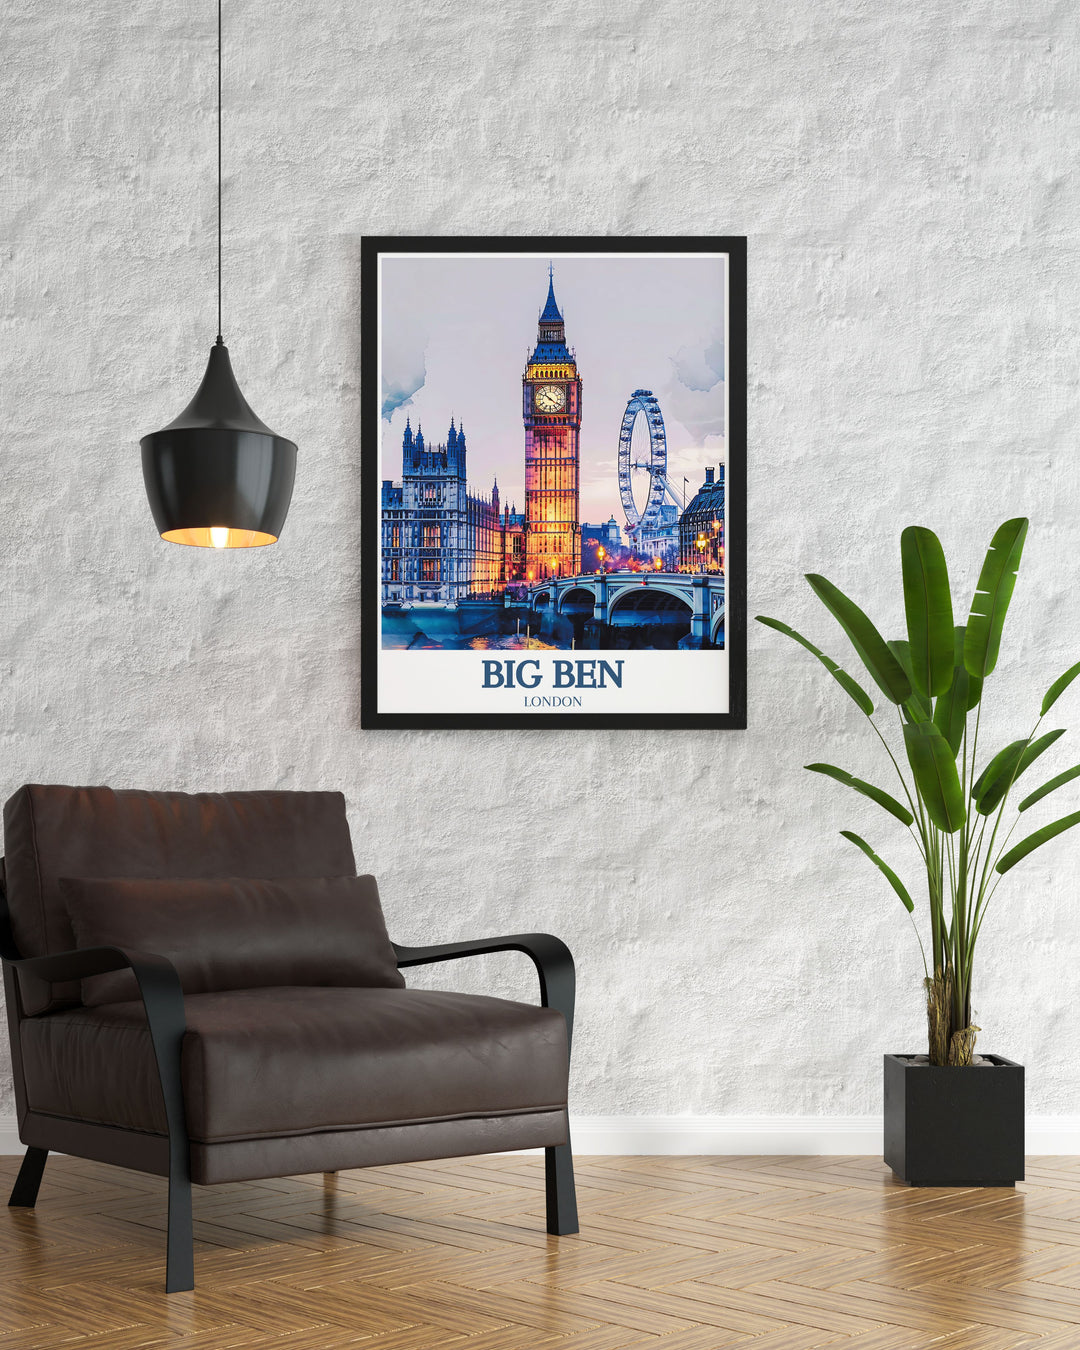 Elegant London wall art depicting Big Ben and the Houses of Parliament with the London Eye, showcasing the citys architectural and scenic beauty. Perfect for adding sophistication and a touch of history to any room.